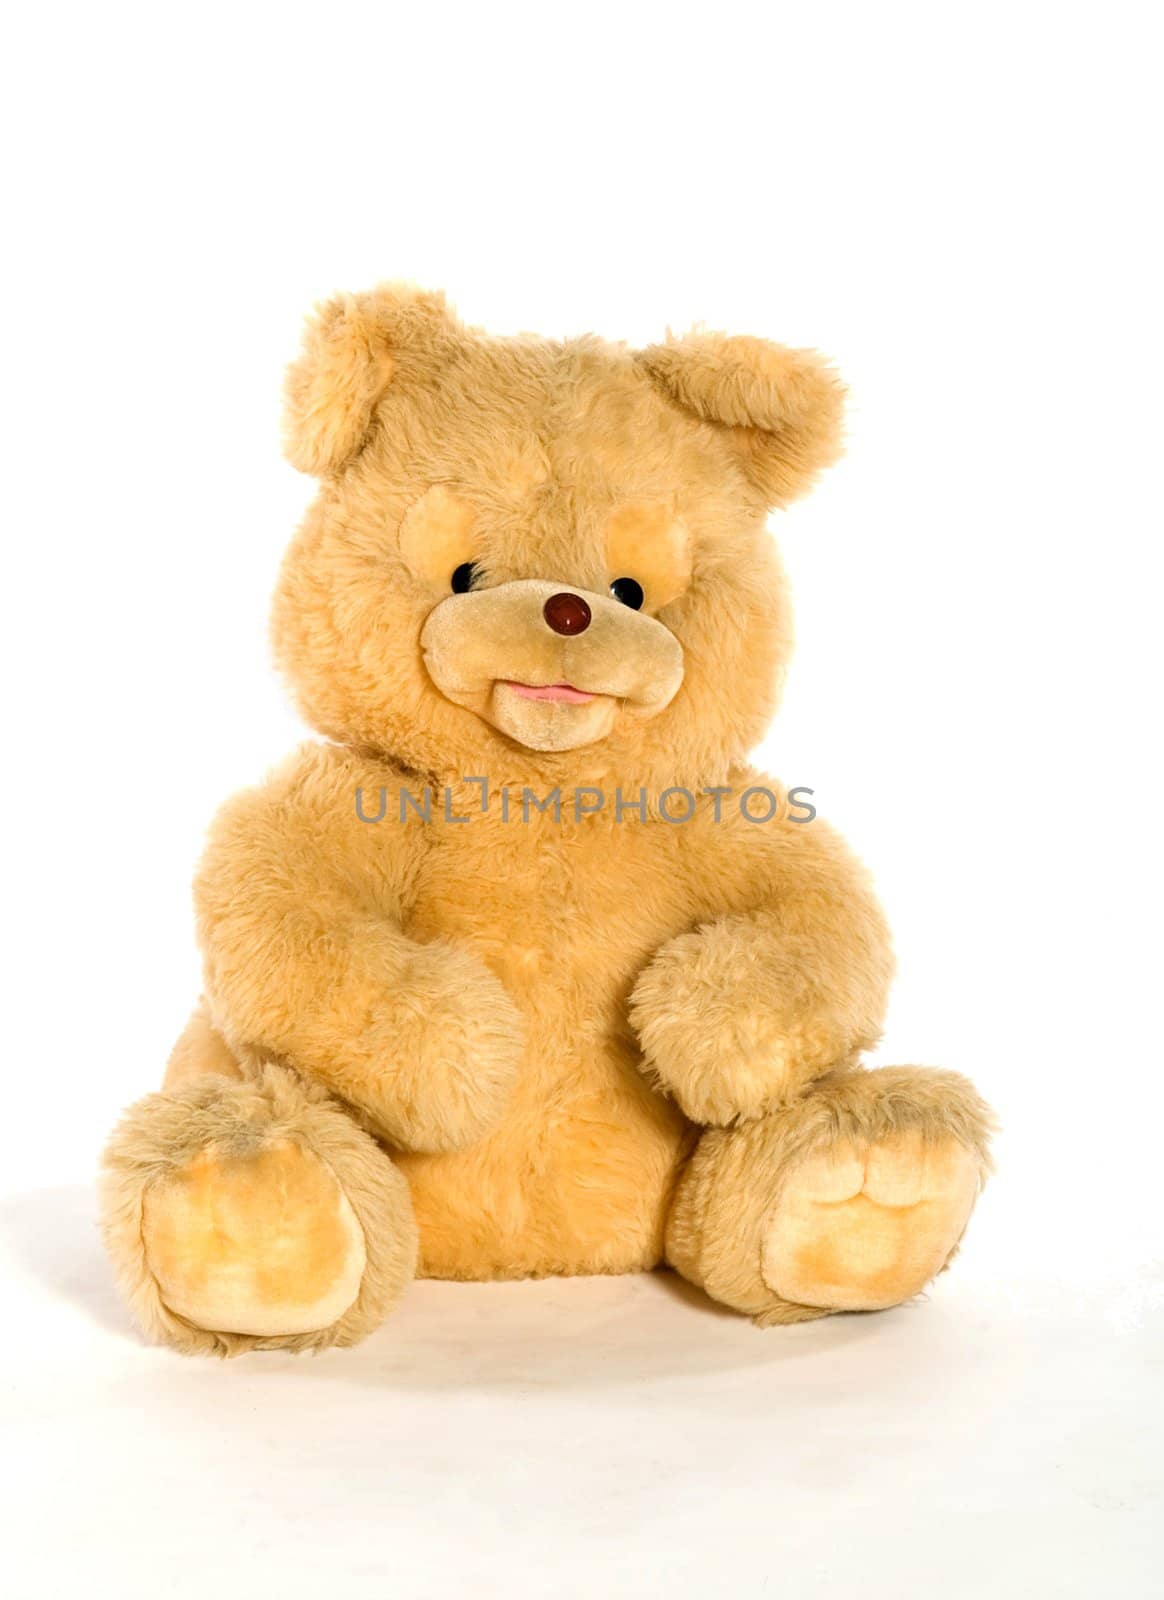 Yellow teddy bear isolated on white by lilsla